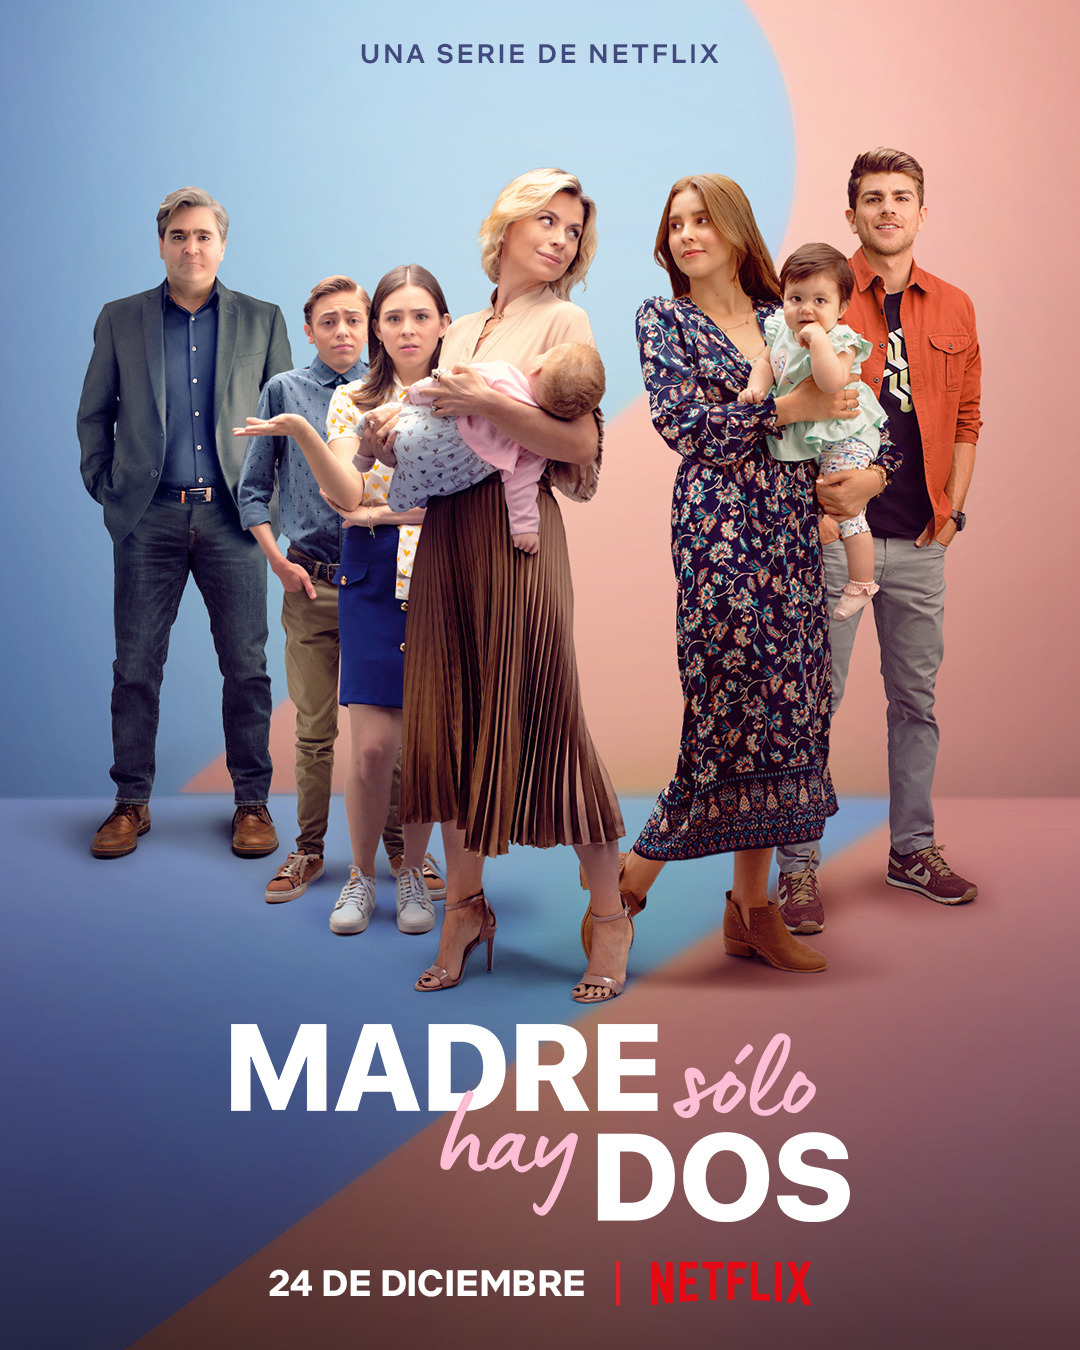 Extra Large TV Poster Image for Madre Solo hay Dos (#2 of 2)